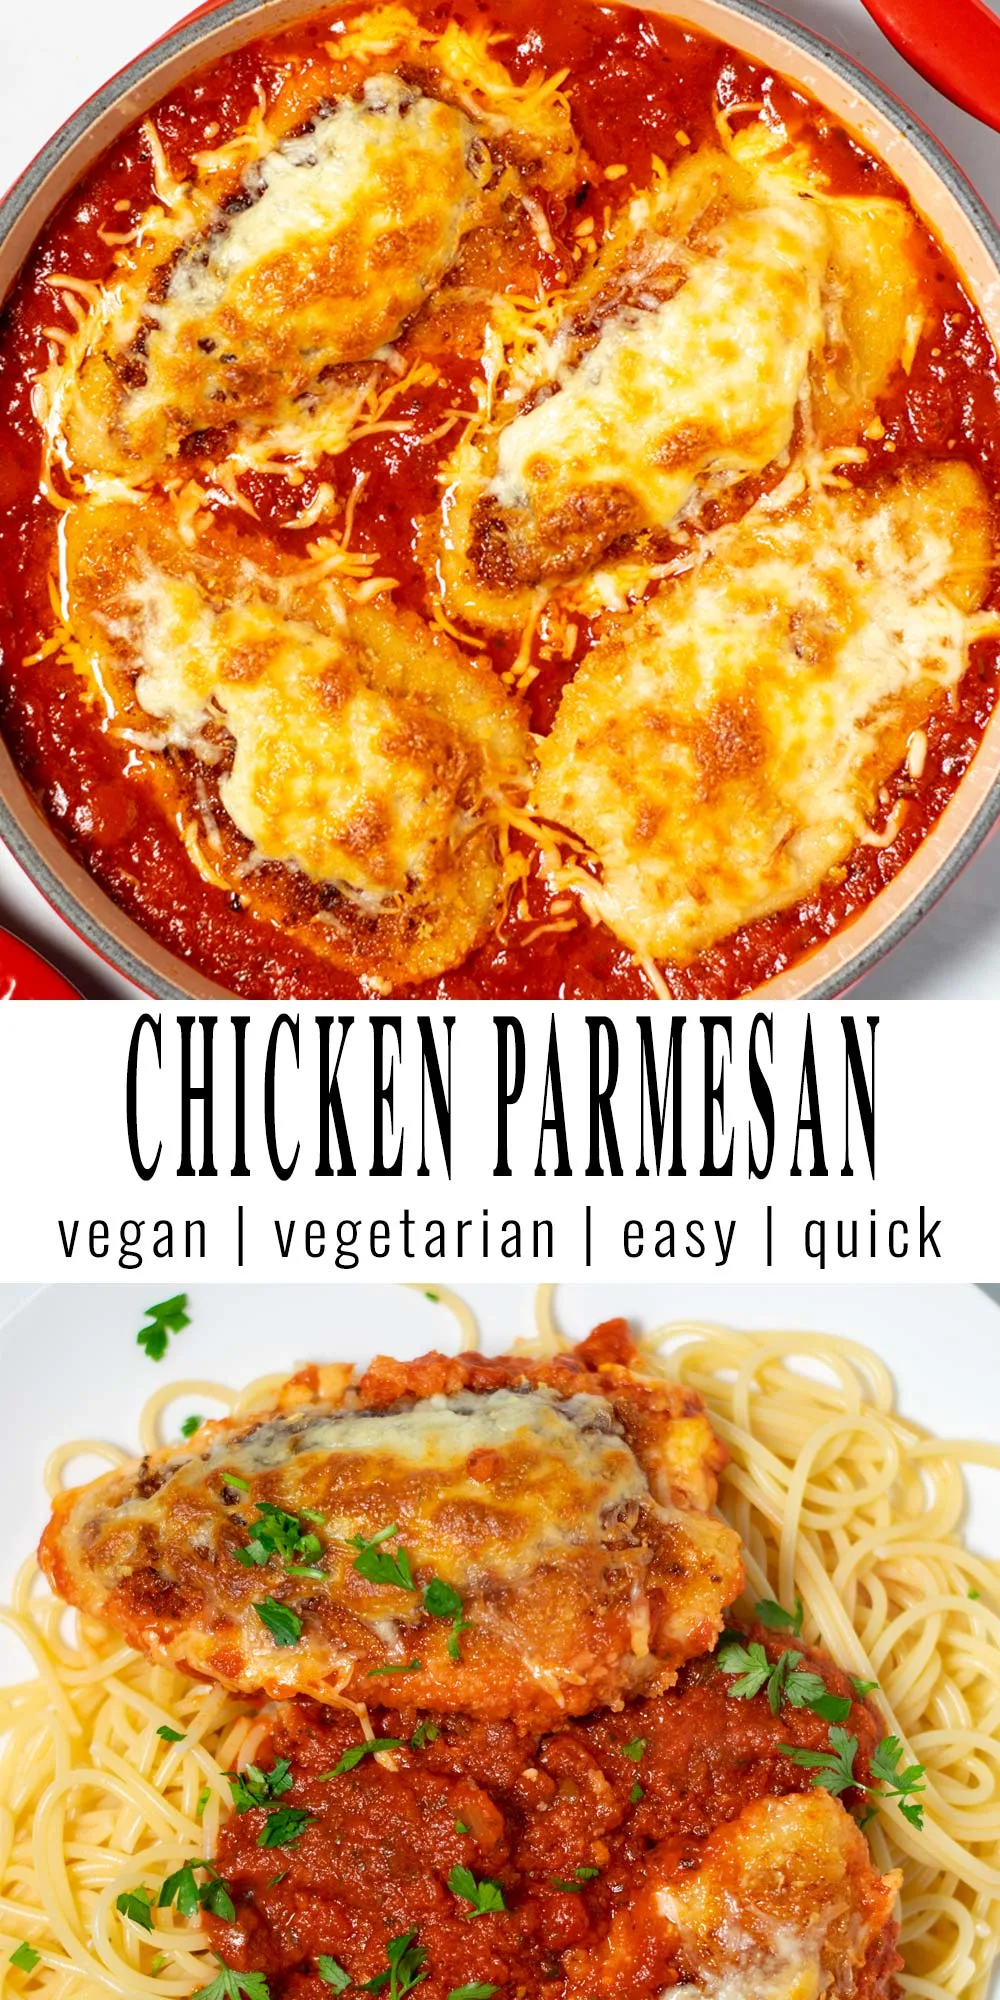 Collage of two photos of Chicken Parmesan with recipe title text.